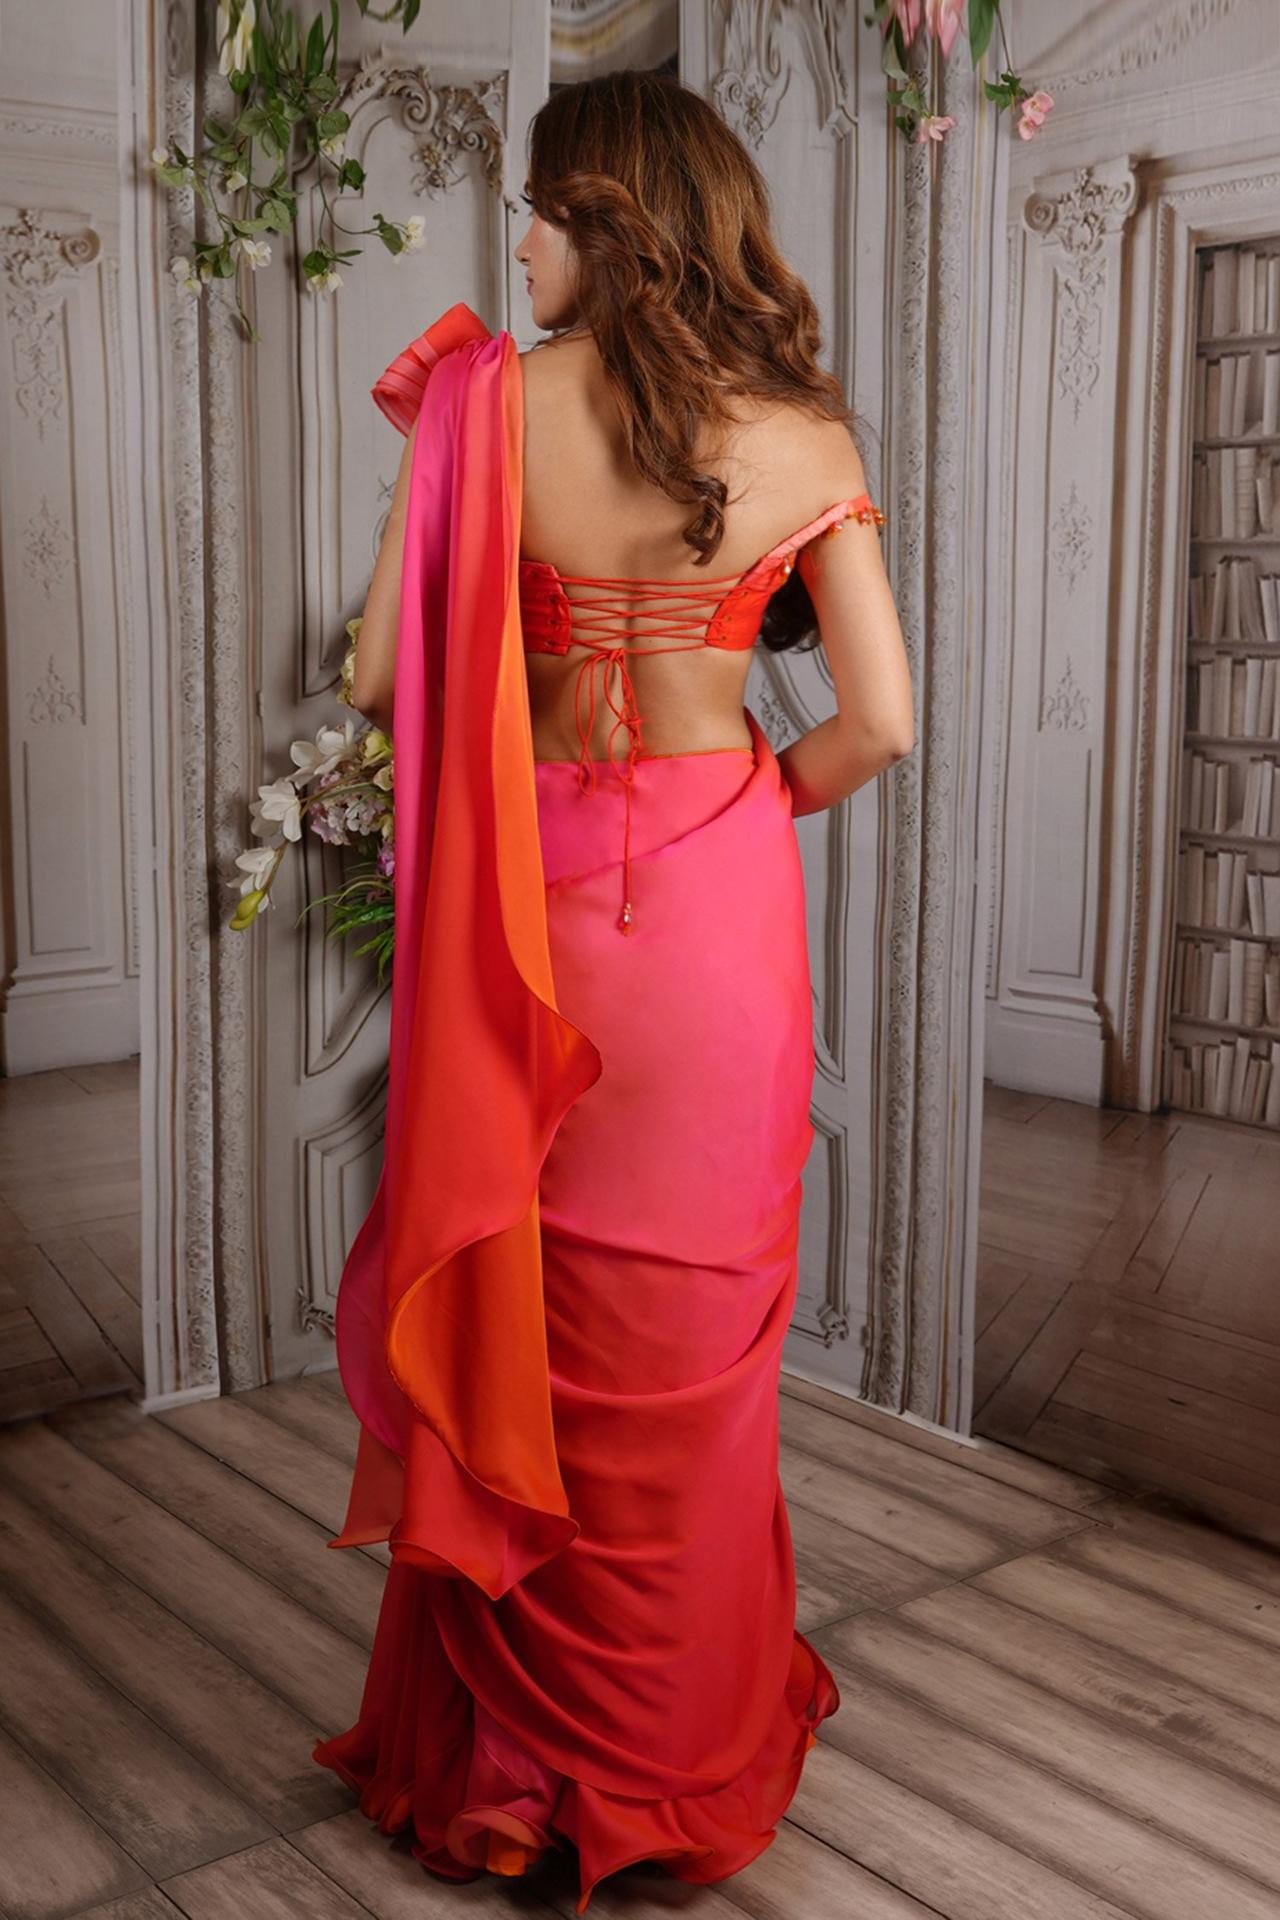 9 Gowns ideas  saree designs indian dresses indian gowns